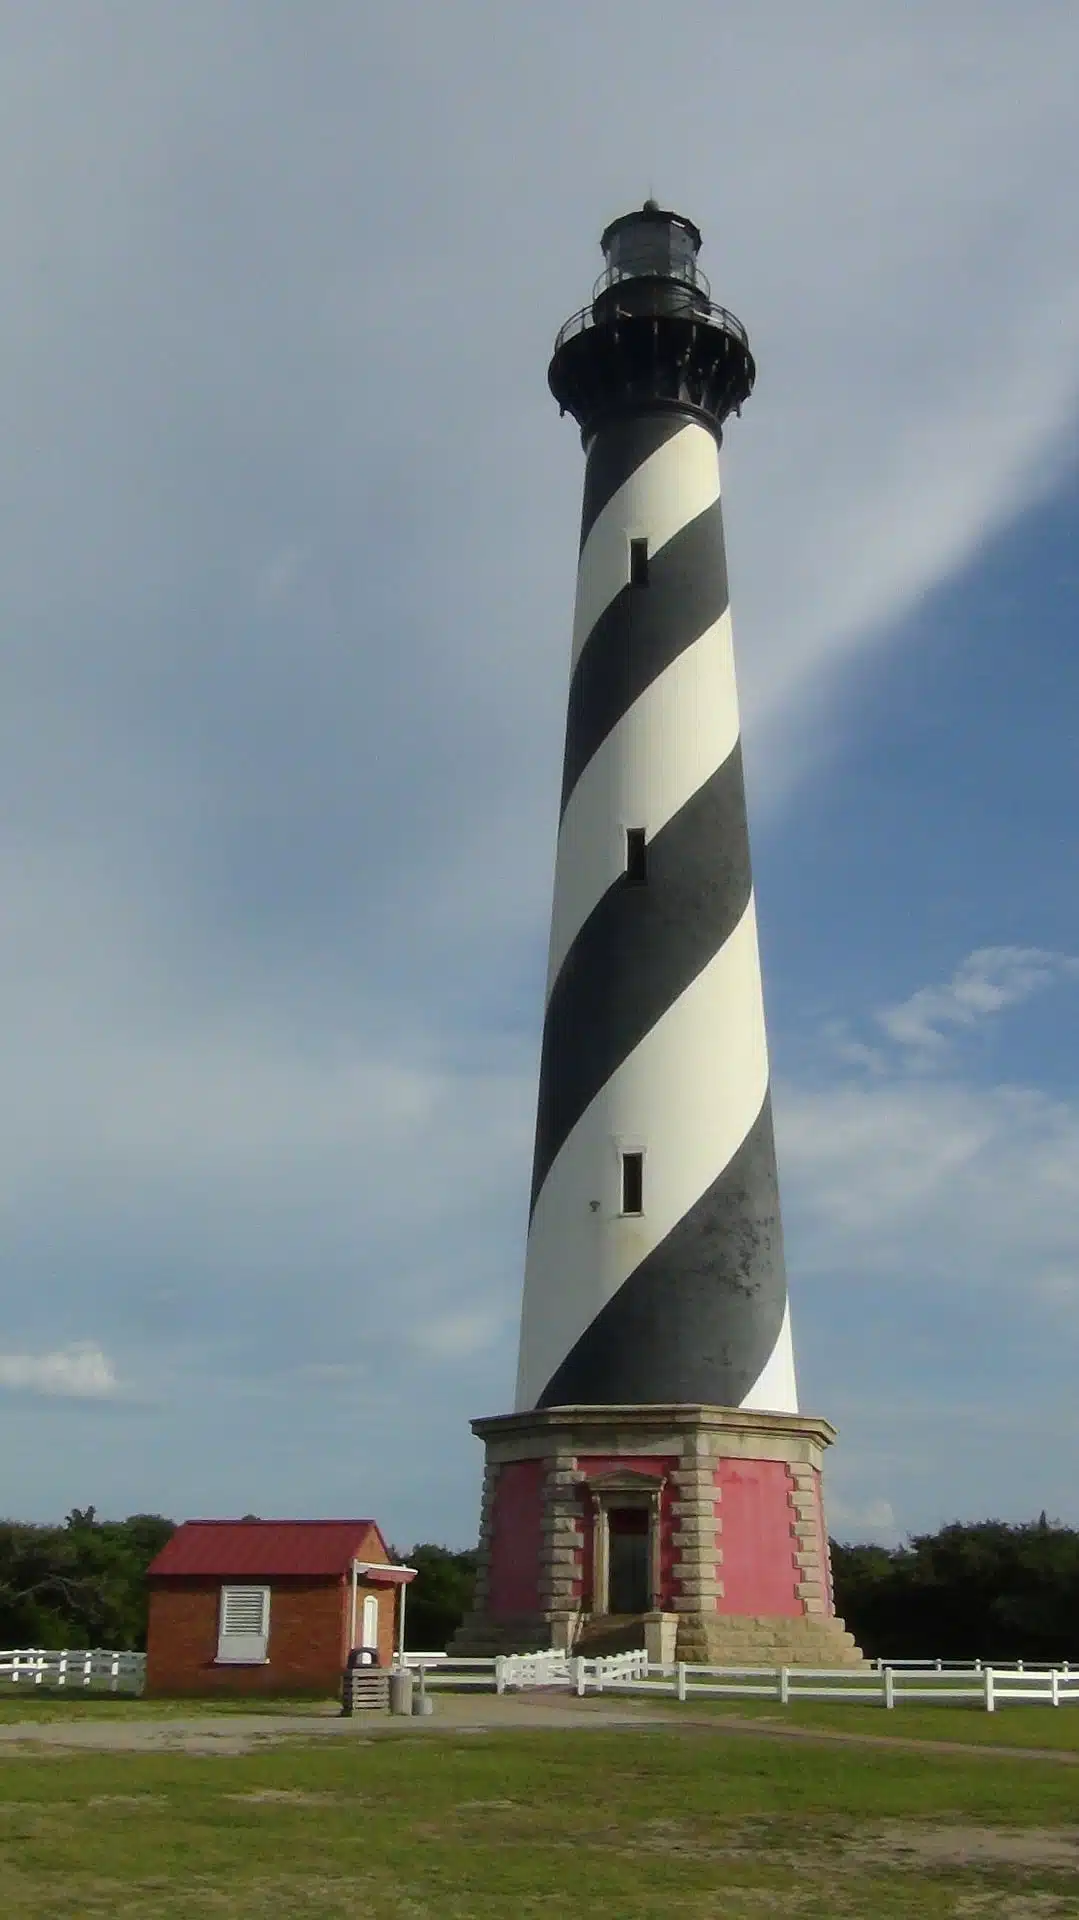 A black and white spiral on a lighthouse